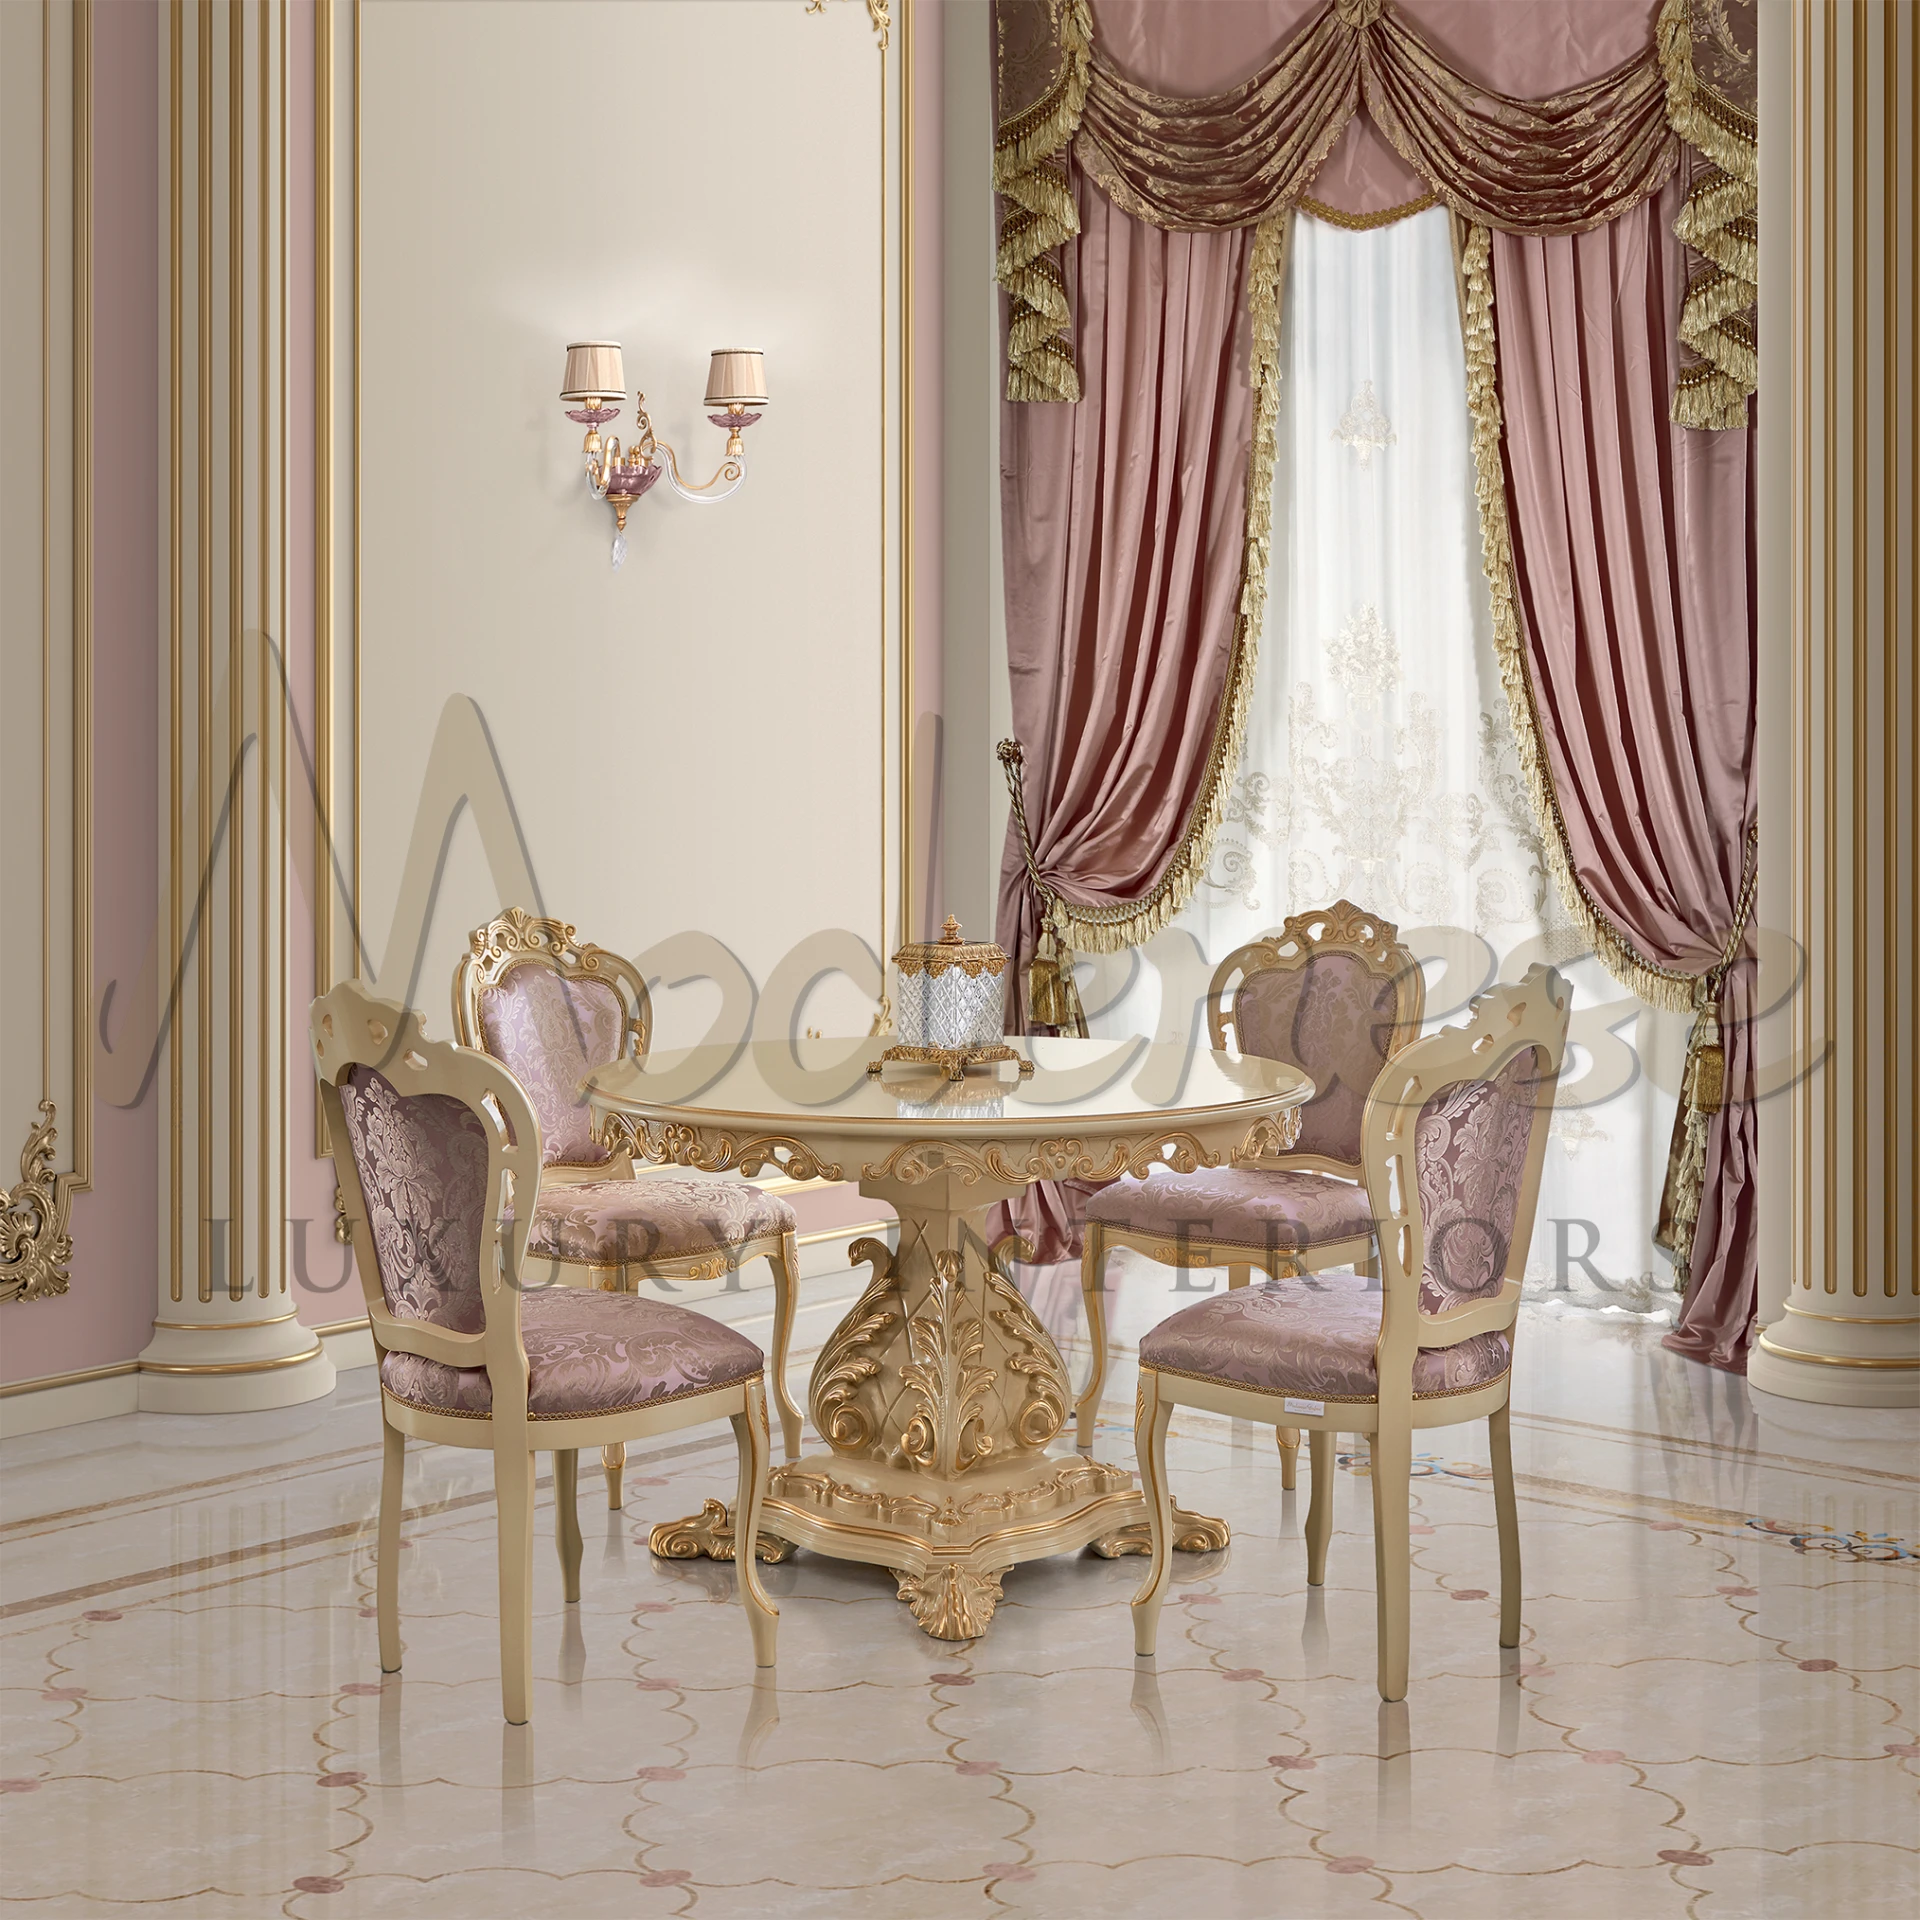 Lavish dining area with detailed design elements and luxurious decor